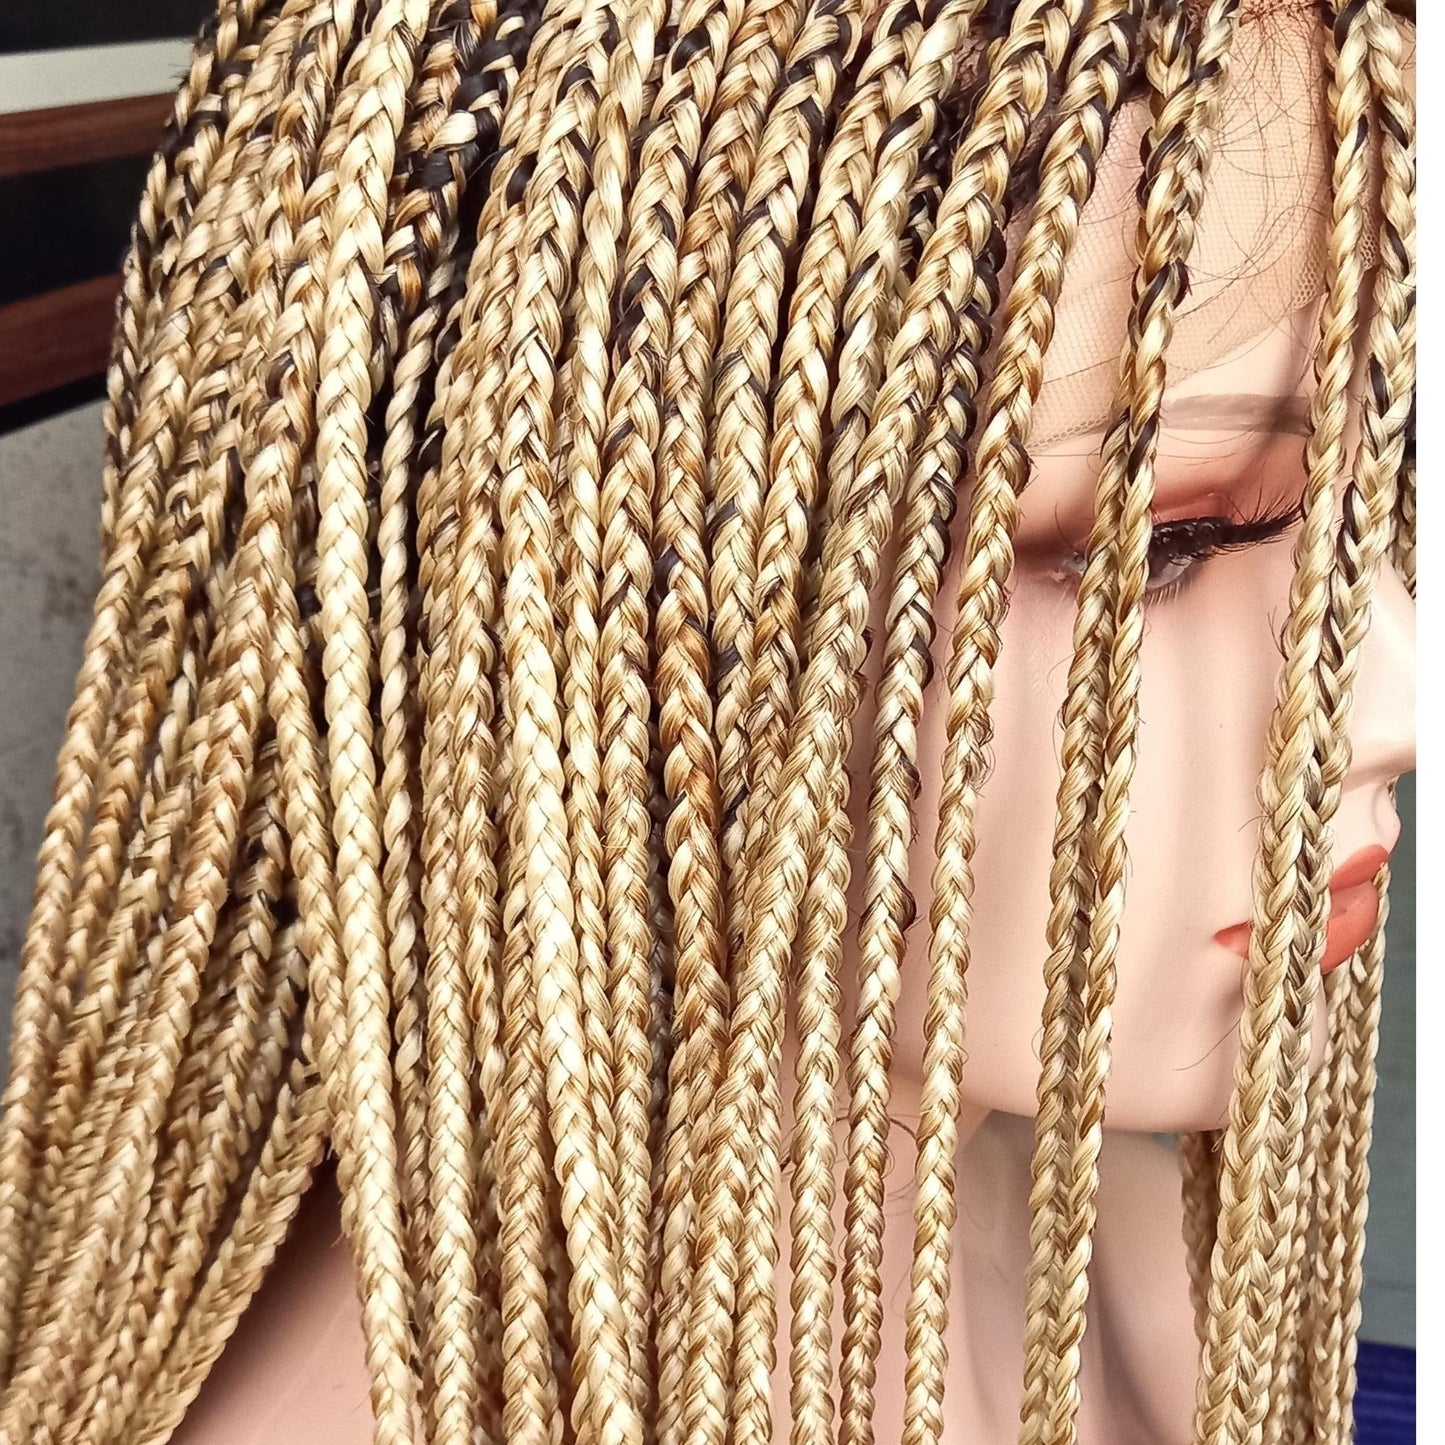 2 in 1 set of braided wig- knotless box braids wig for black women- cornrows wig Available in Different Lengths & Colors human hair lace - BRAIDED WIG BOSS